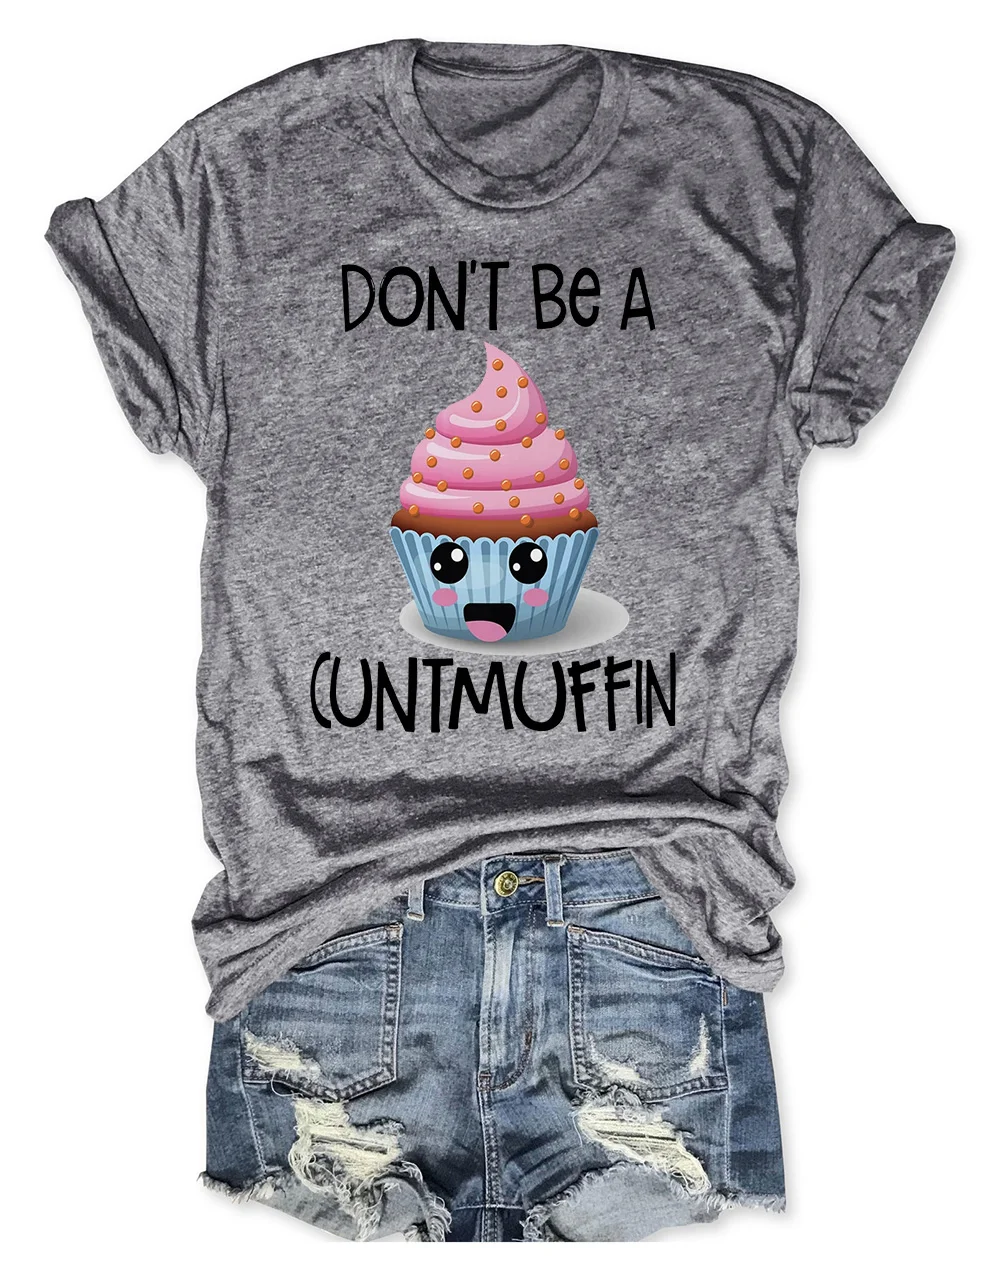 Don't Be A Cuntmuffin/Twatwaffle Funny T-Shirt